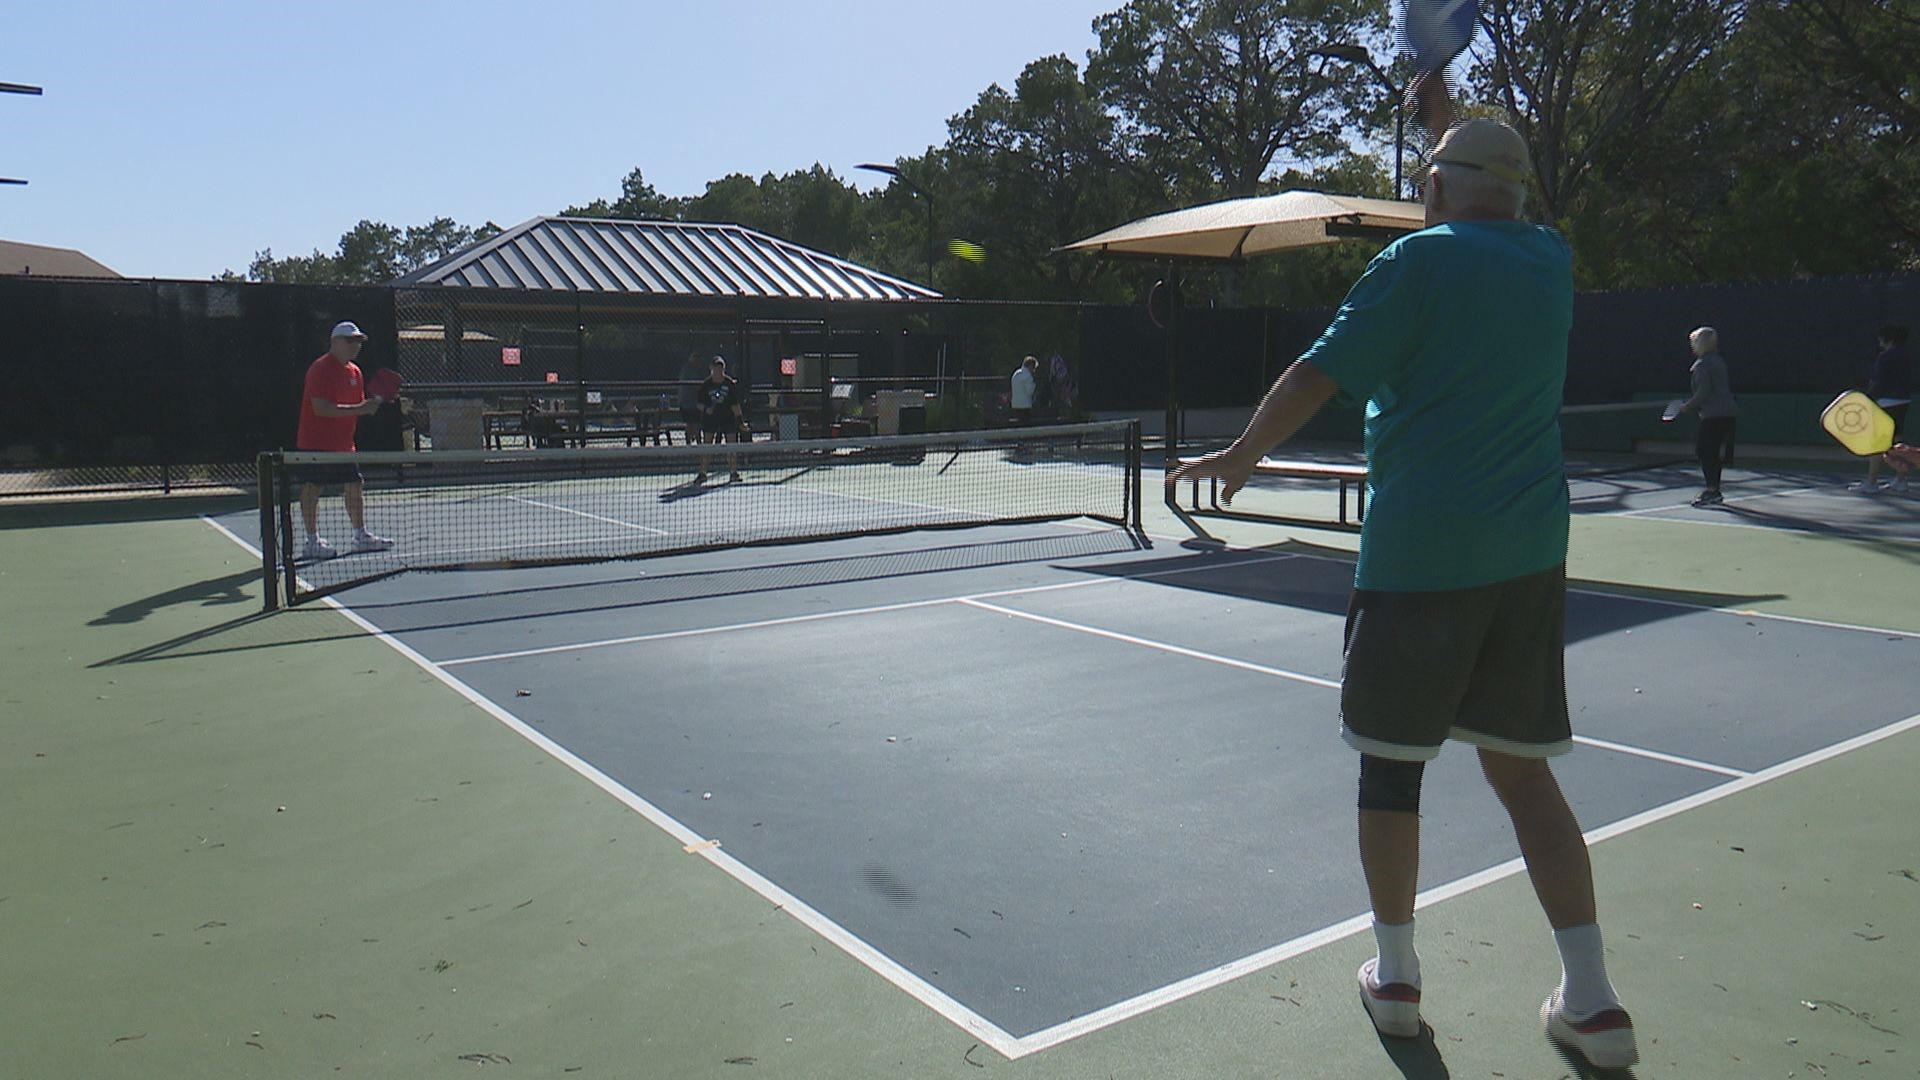 The city is repurposing and combining tennis courts and basketball courts with pickleball courts as the popularity of the sport grows.